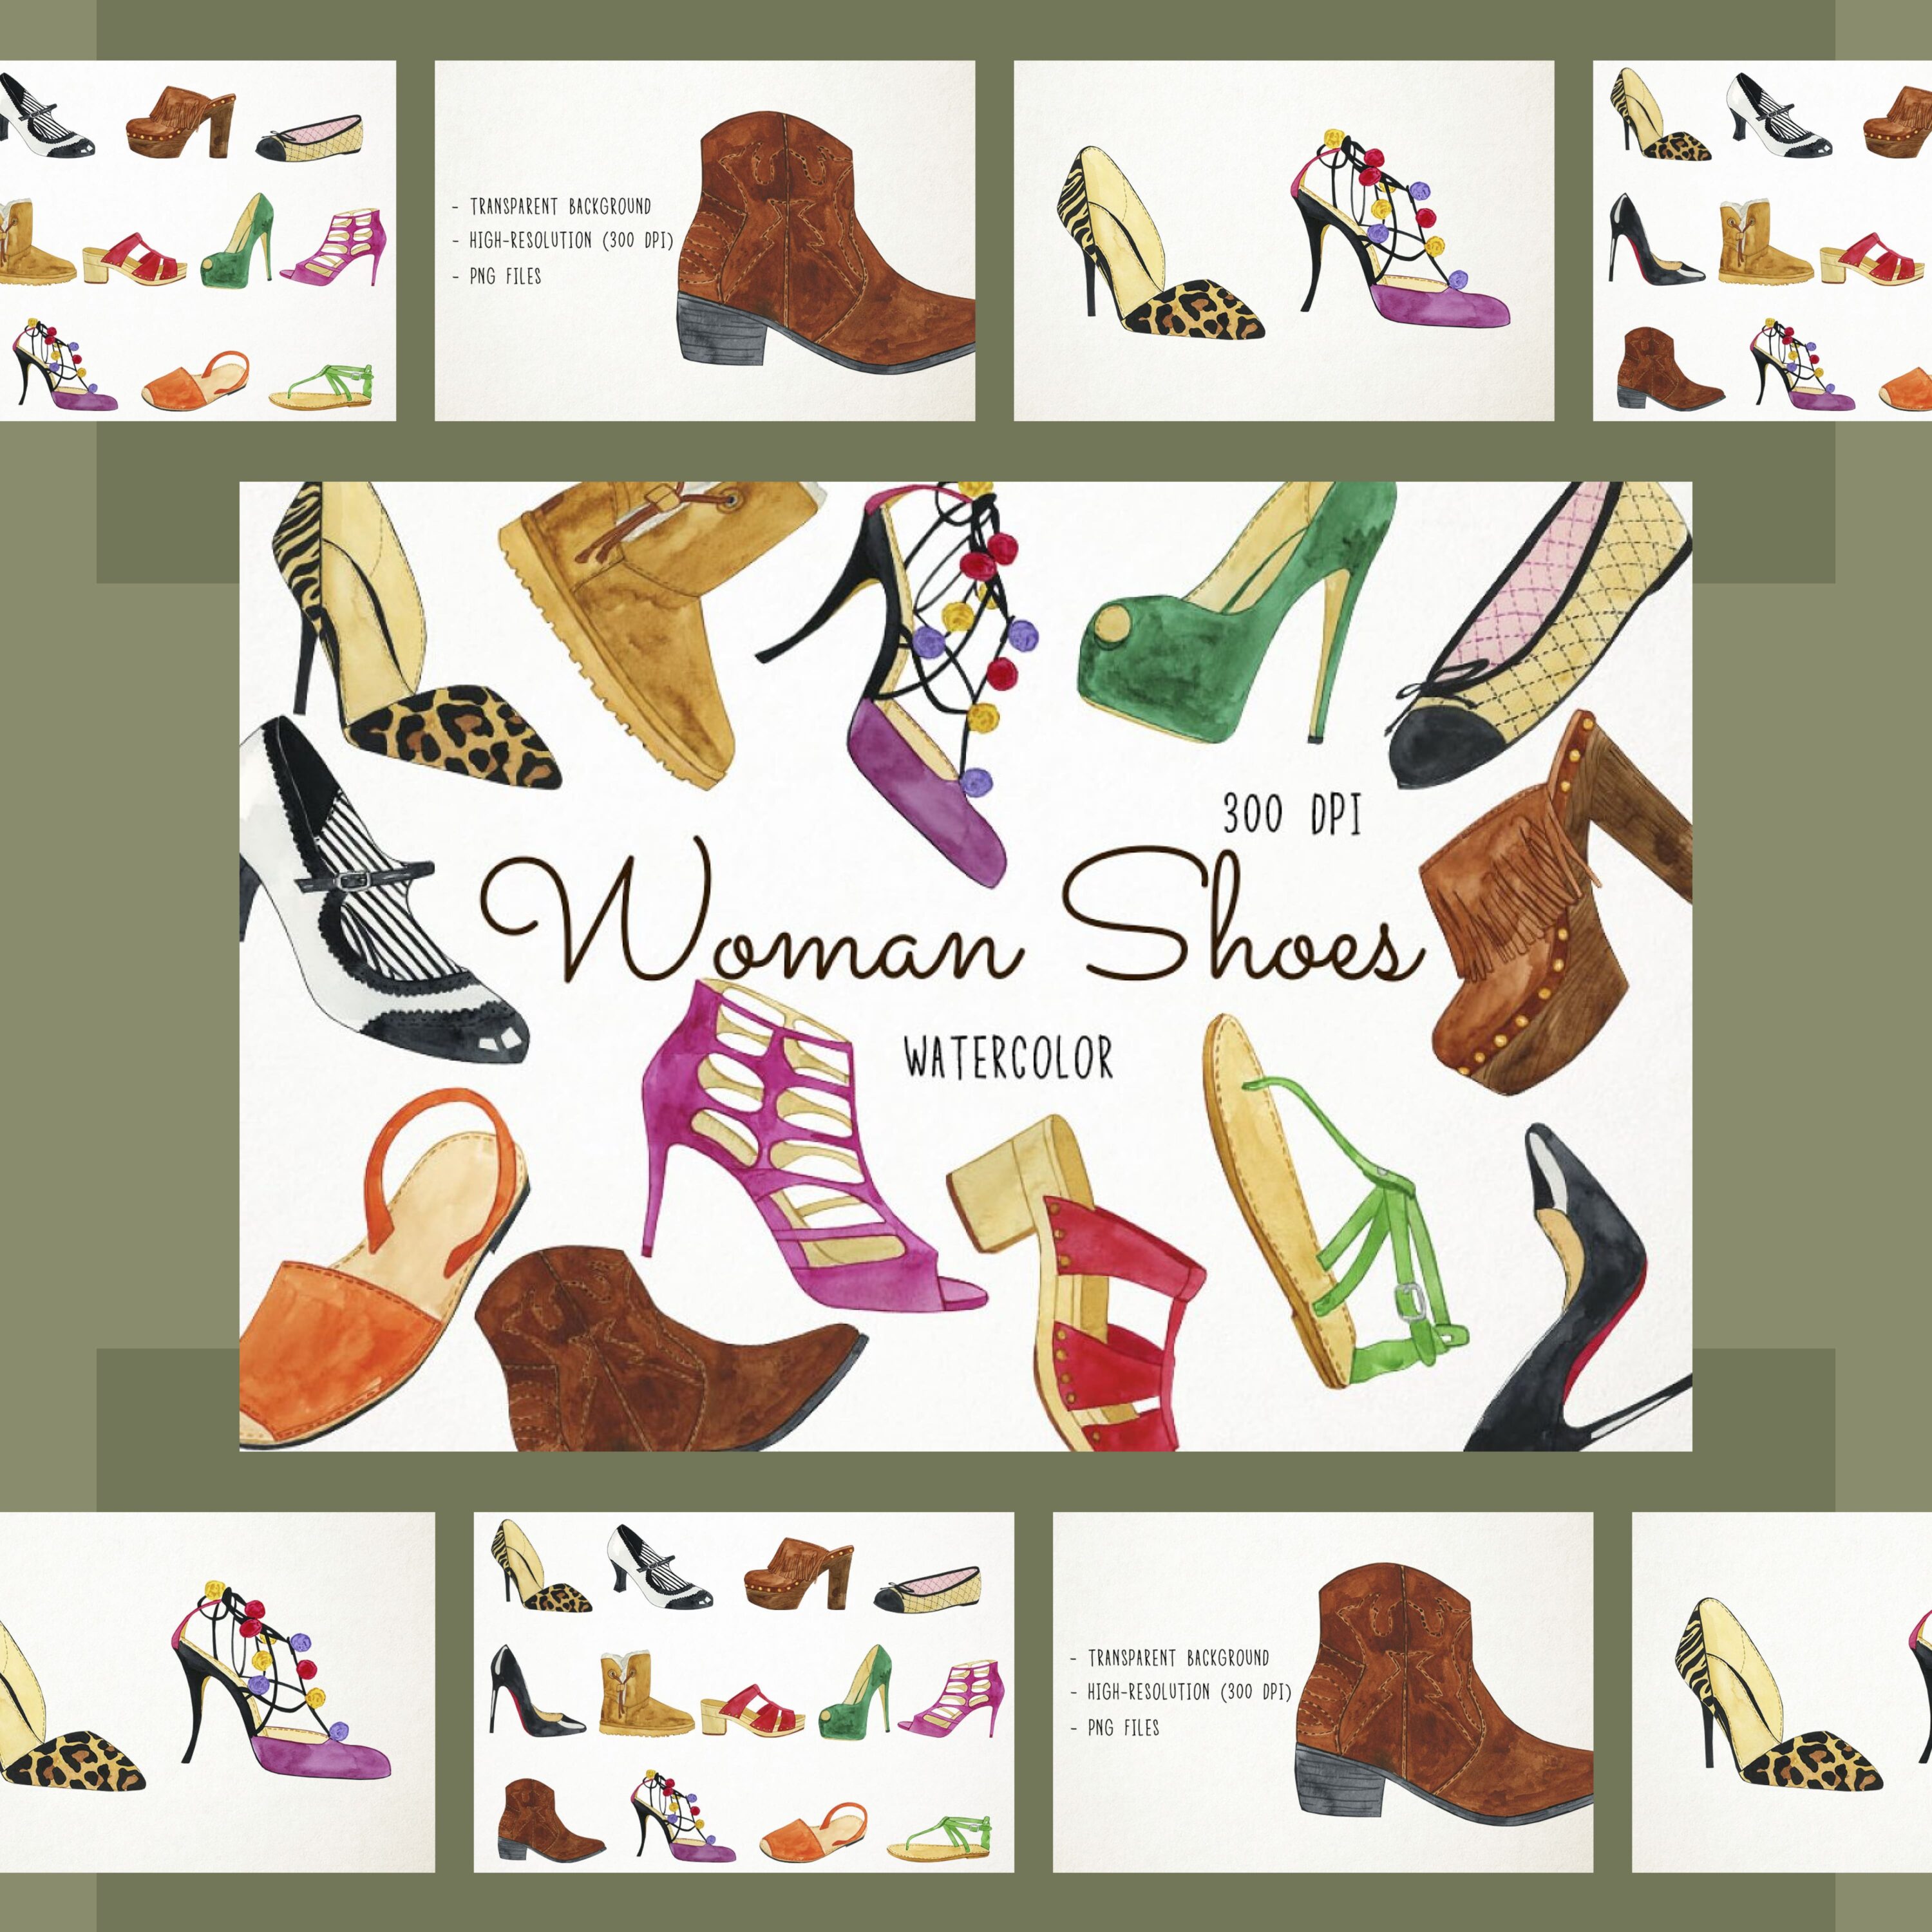 Watercolor Woman Shoes Clipart cover.